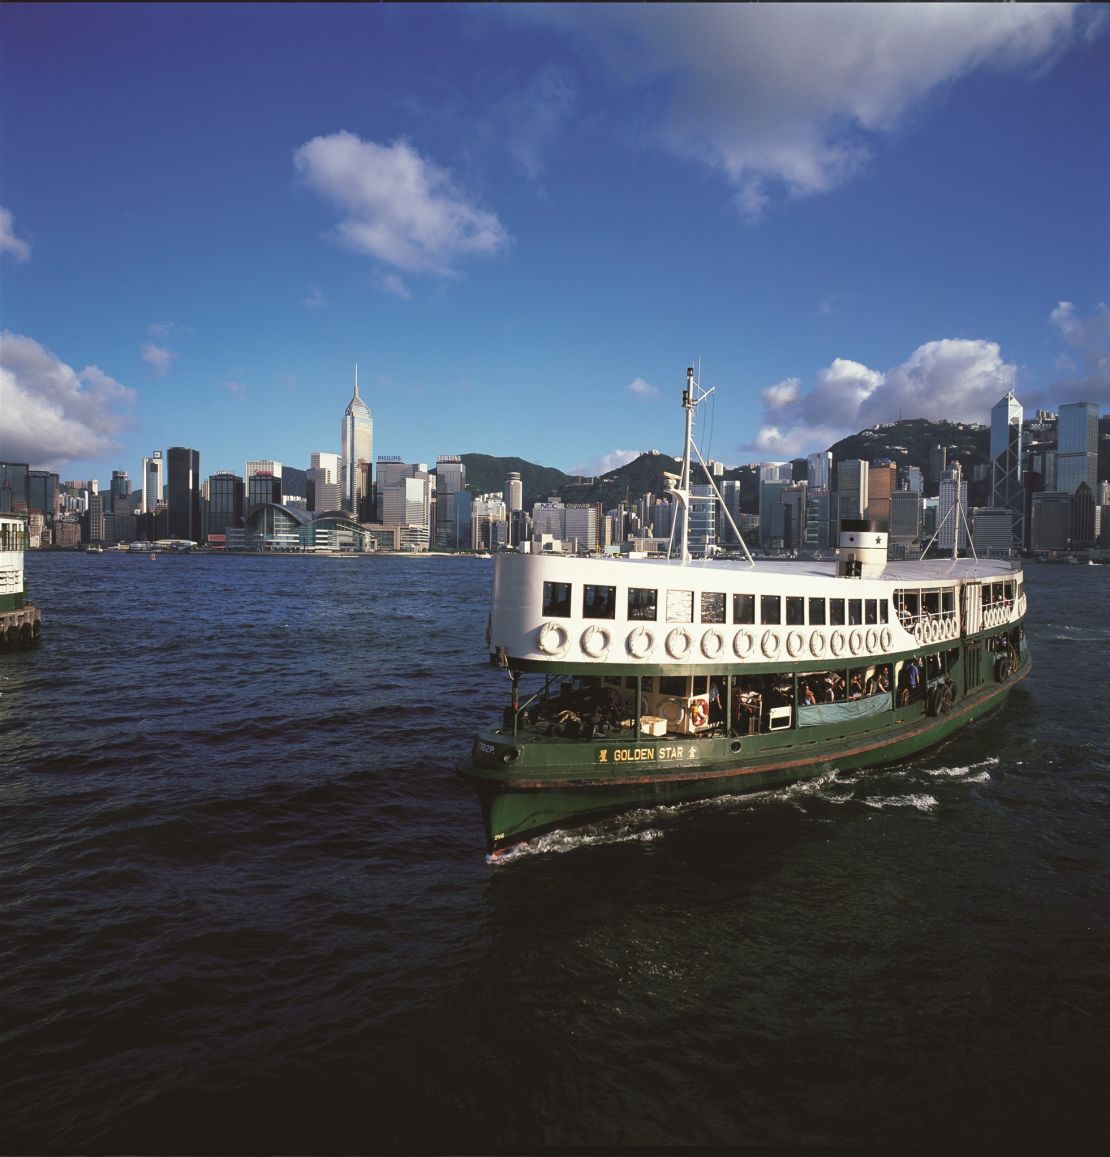 Hong Kong's beloved Star Ferry has been crossing Victoria Harbour since 1888.